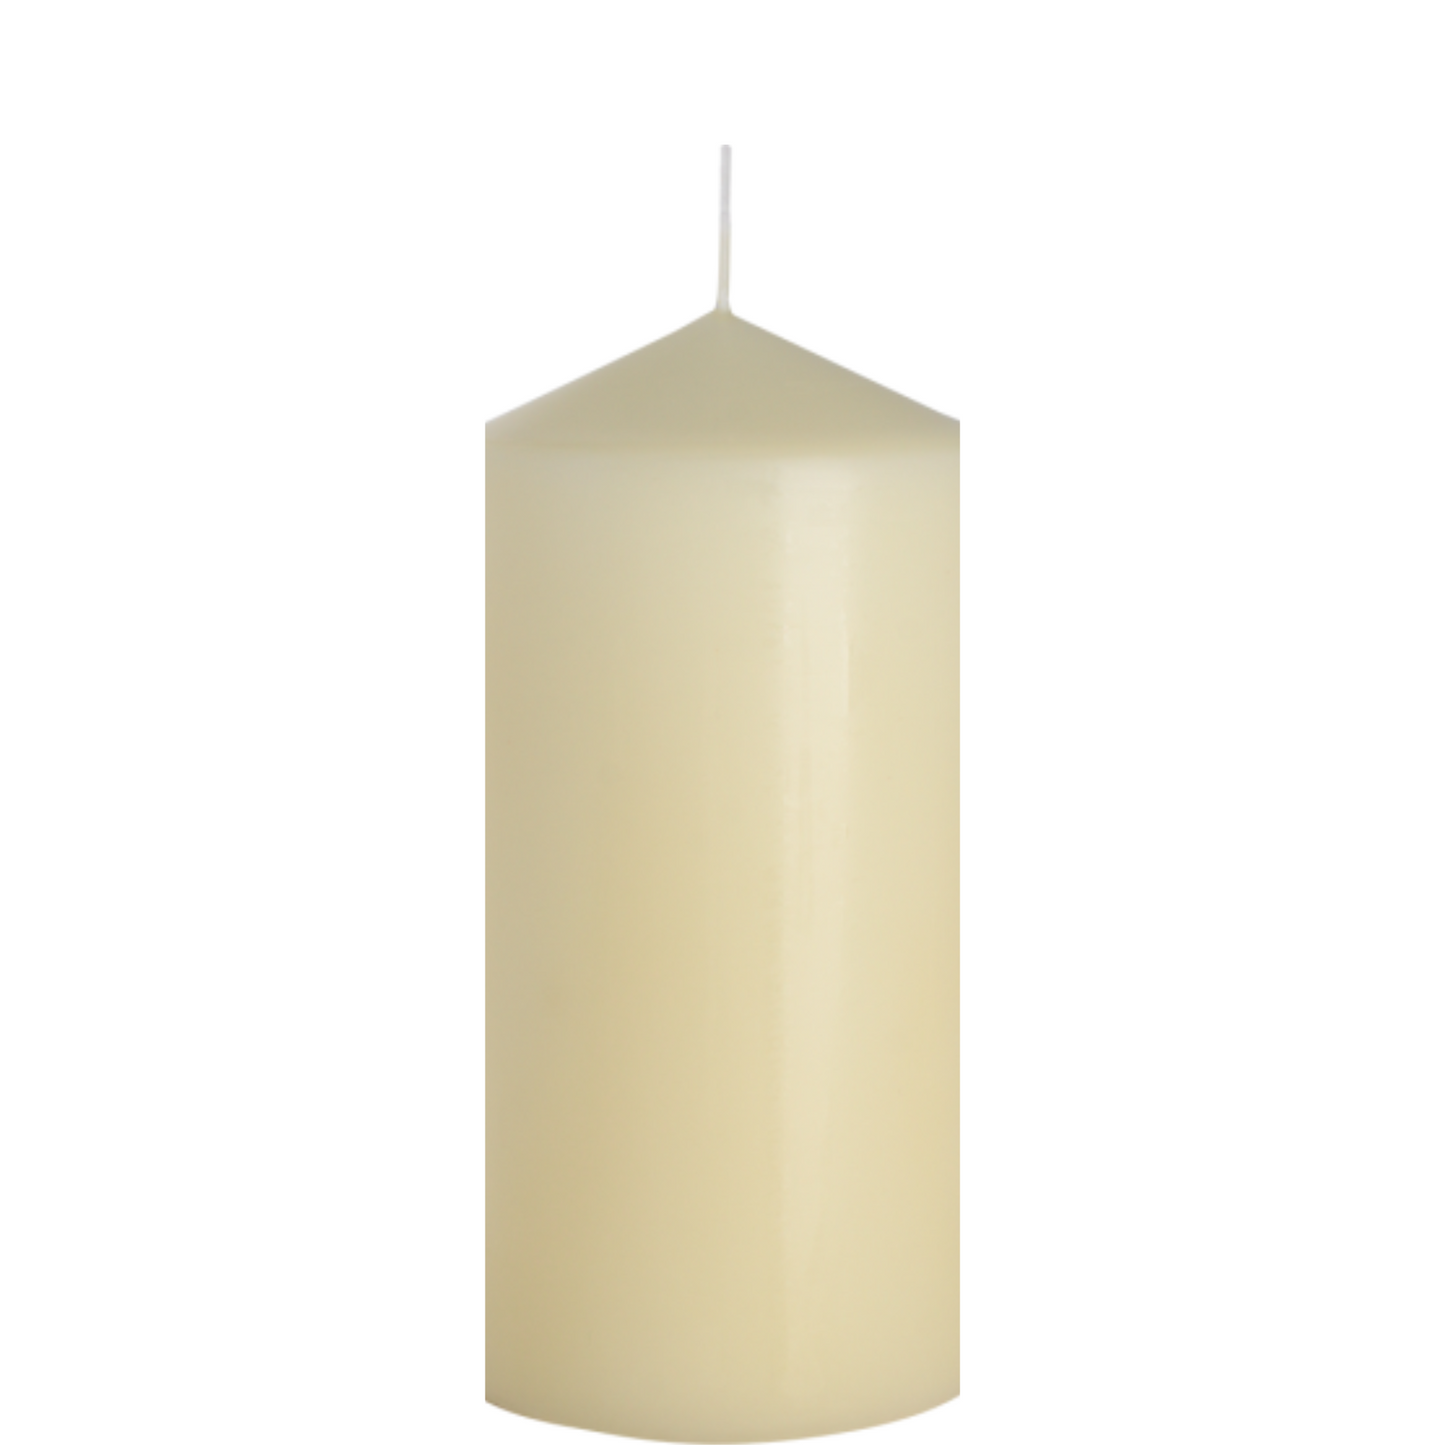 Cylindrical candle 15 x 8 cm.